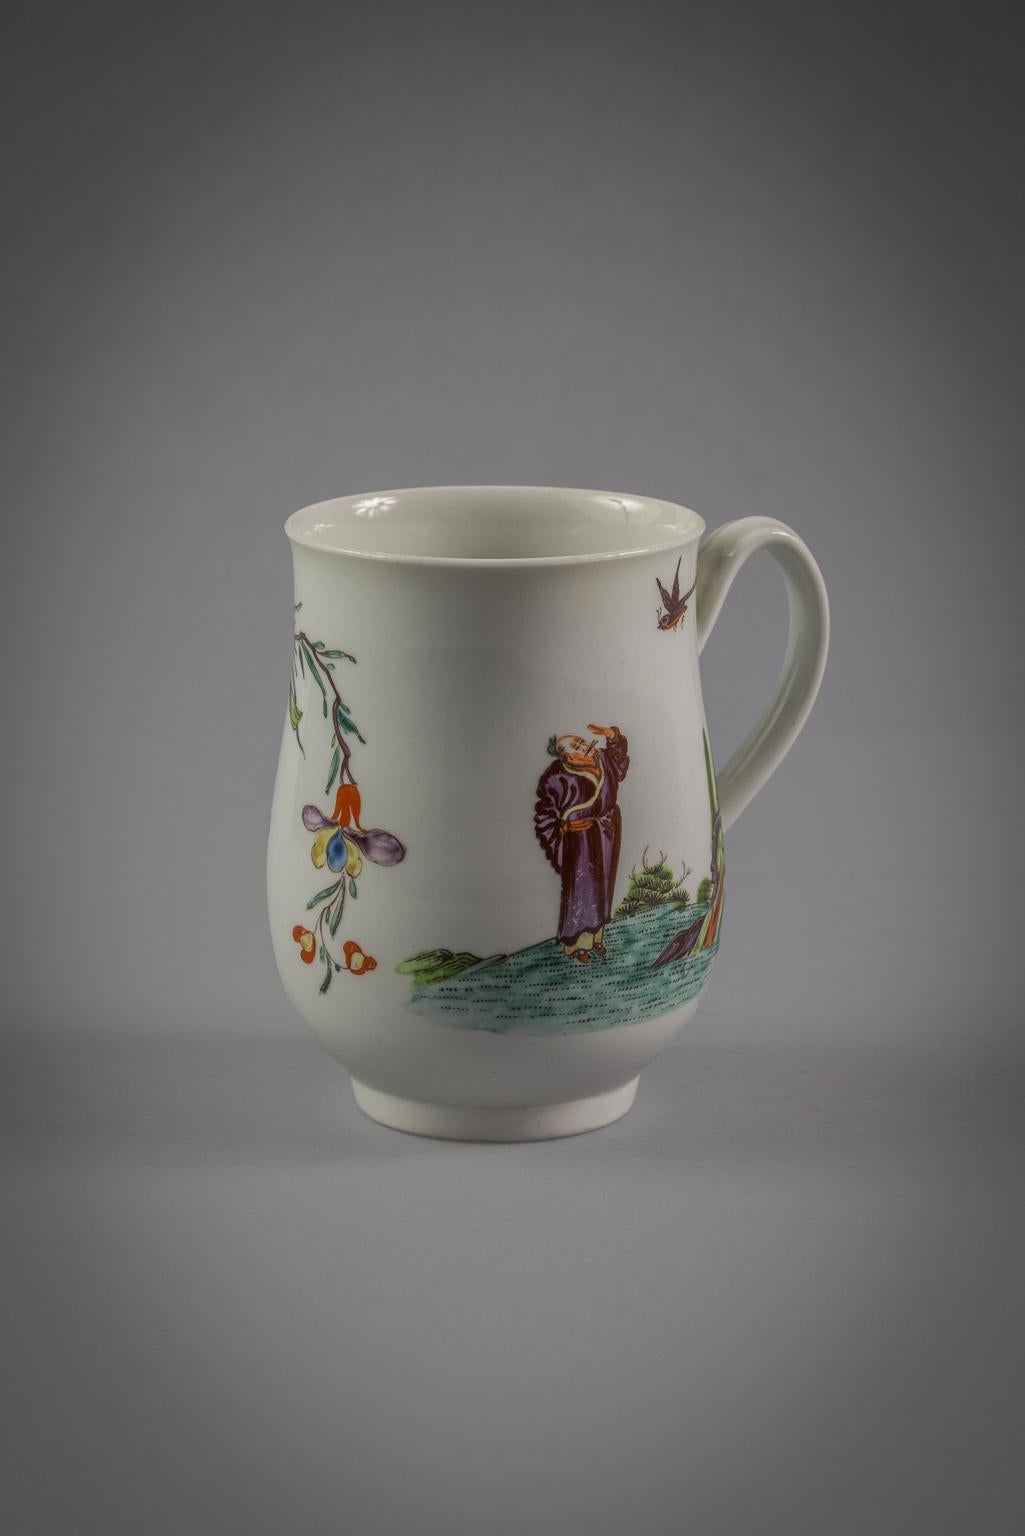 painted on one side with the Chinaman gesturing towards a flying bird, and on the other with a colorful flowering branch. Literature: Spero, Simon, and Paul Macapia. Worcester Porcelain: the Klepser Collection. Minneapolis Institute of Arts in